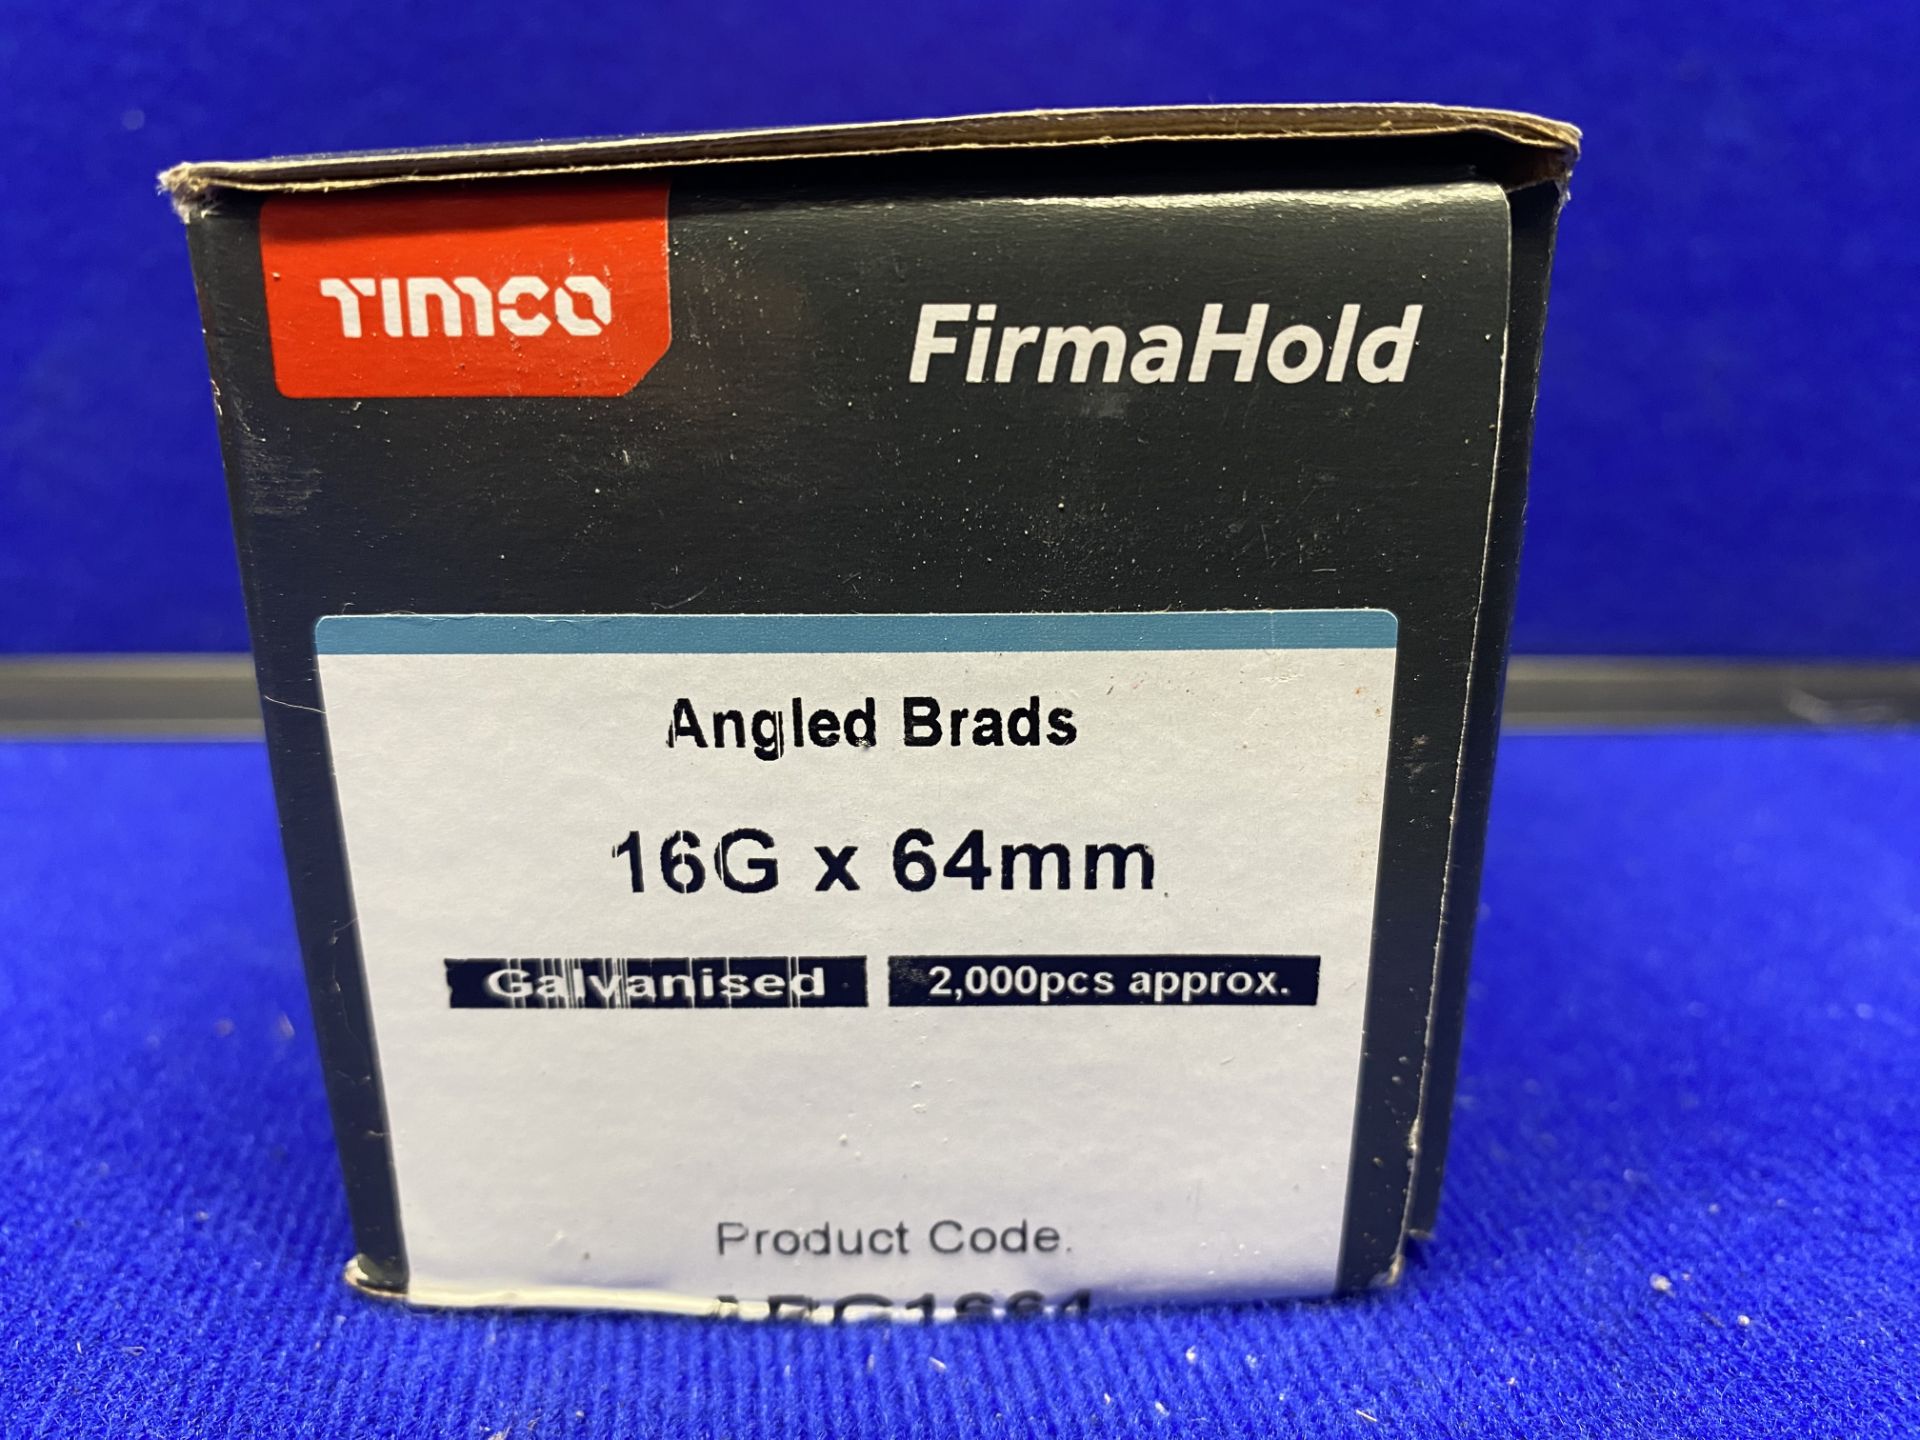 23 x Boxes Of Various TimCo FirmaHold Collated Brad Nails - See Description - Image 5 of 6